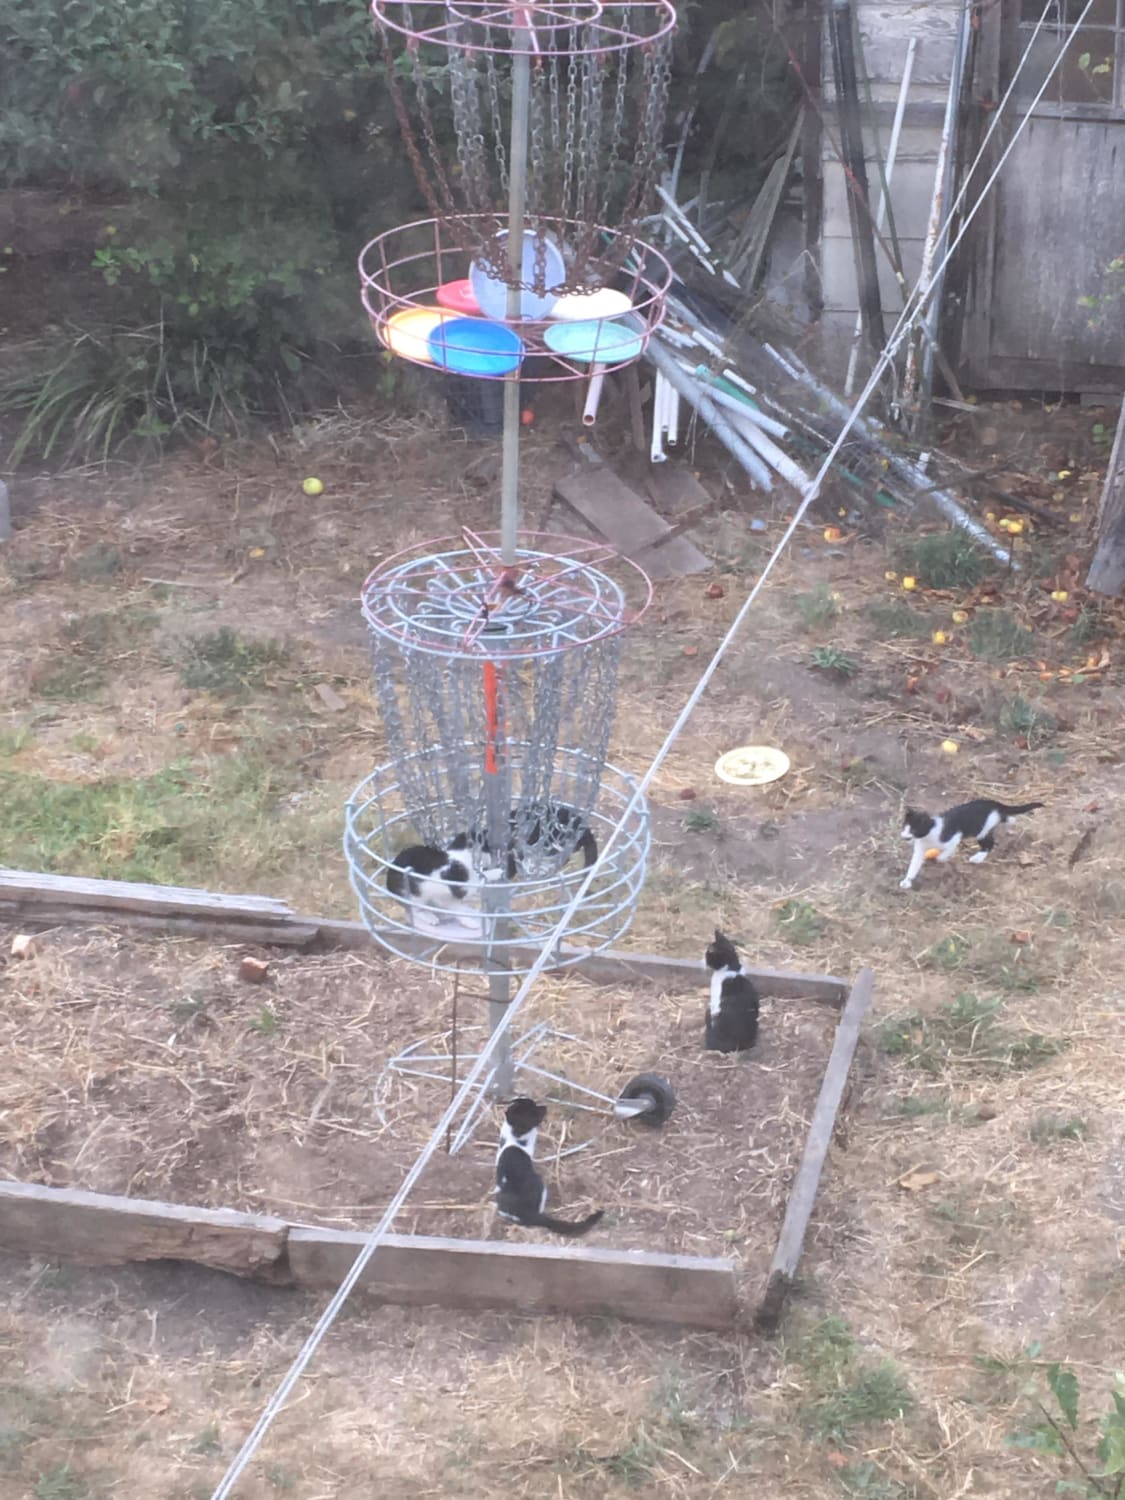 Caught a litter of stray cats playing disc golf in my backyard.